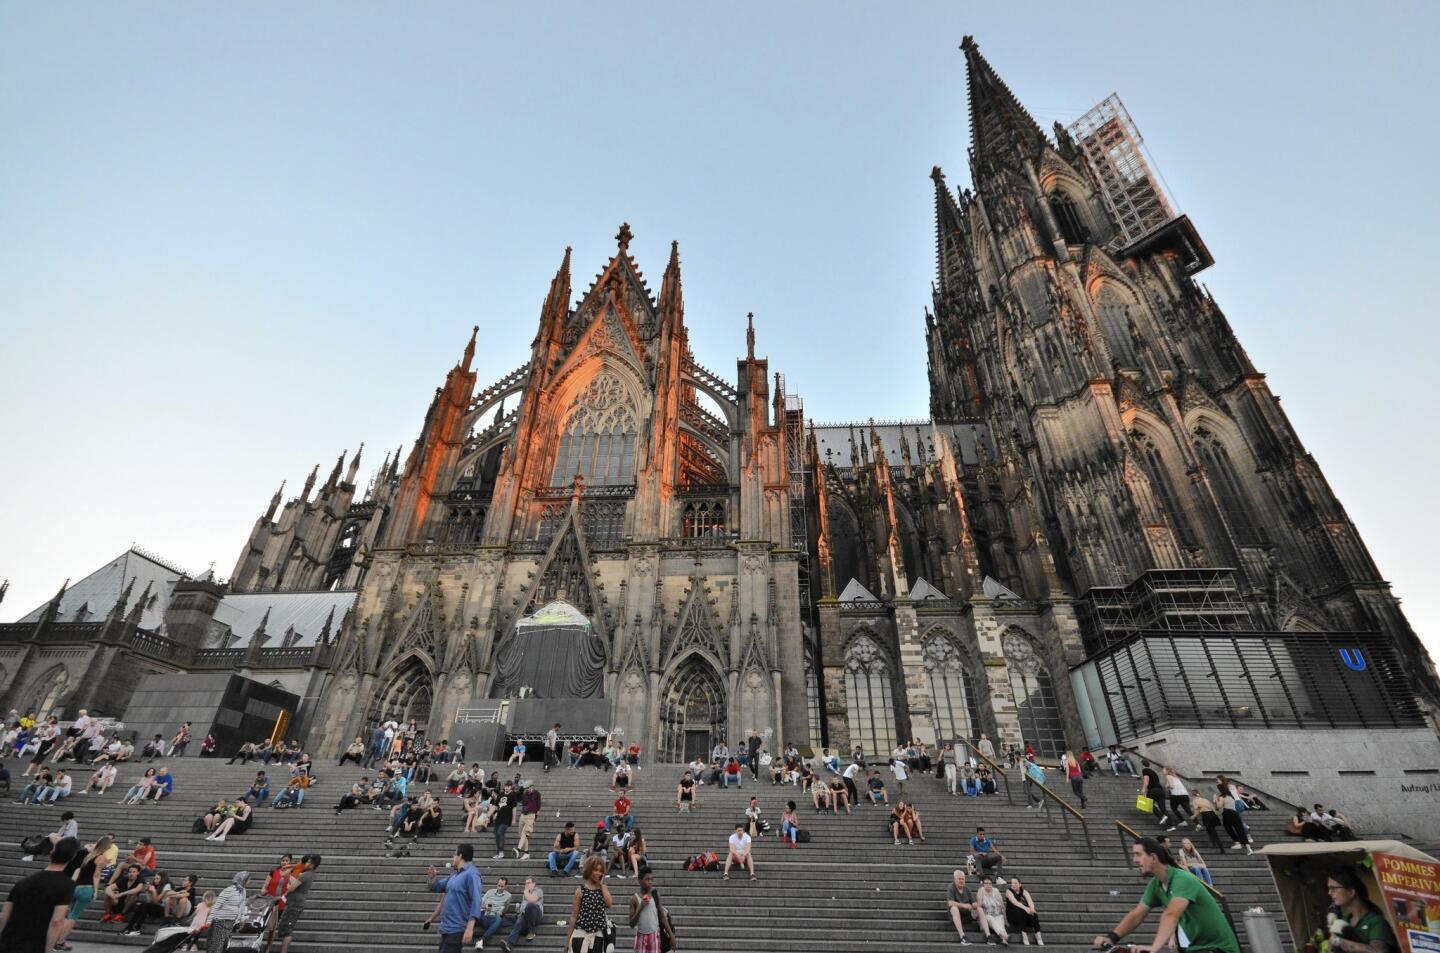 Cologne's famed cathedral greets visitors as they exit the main train station.